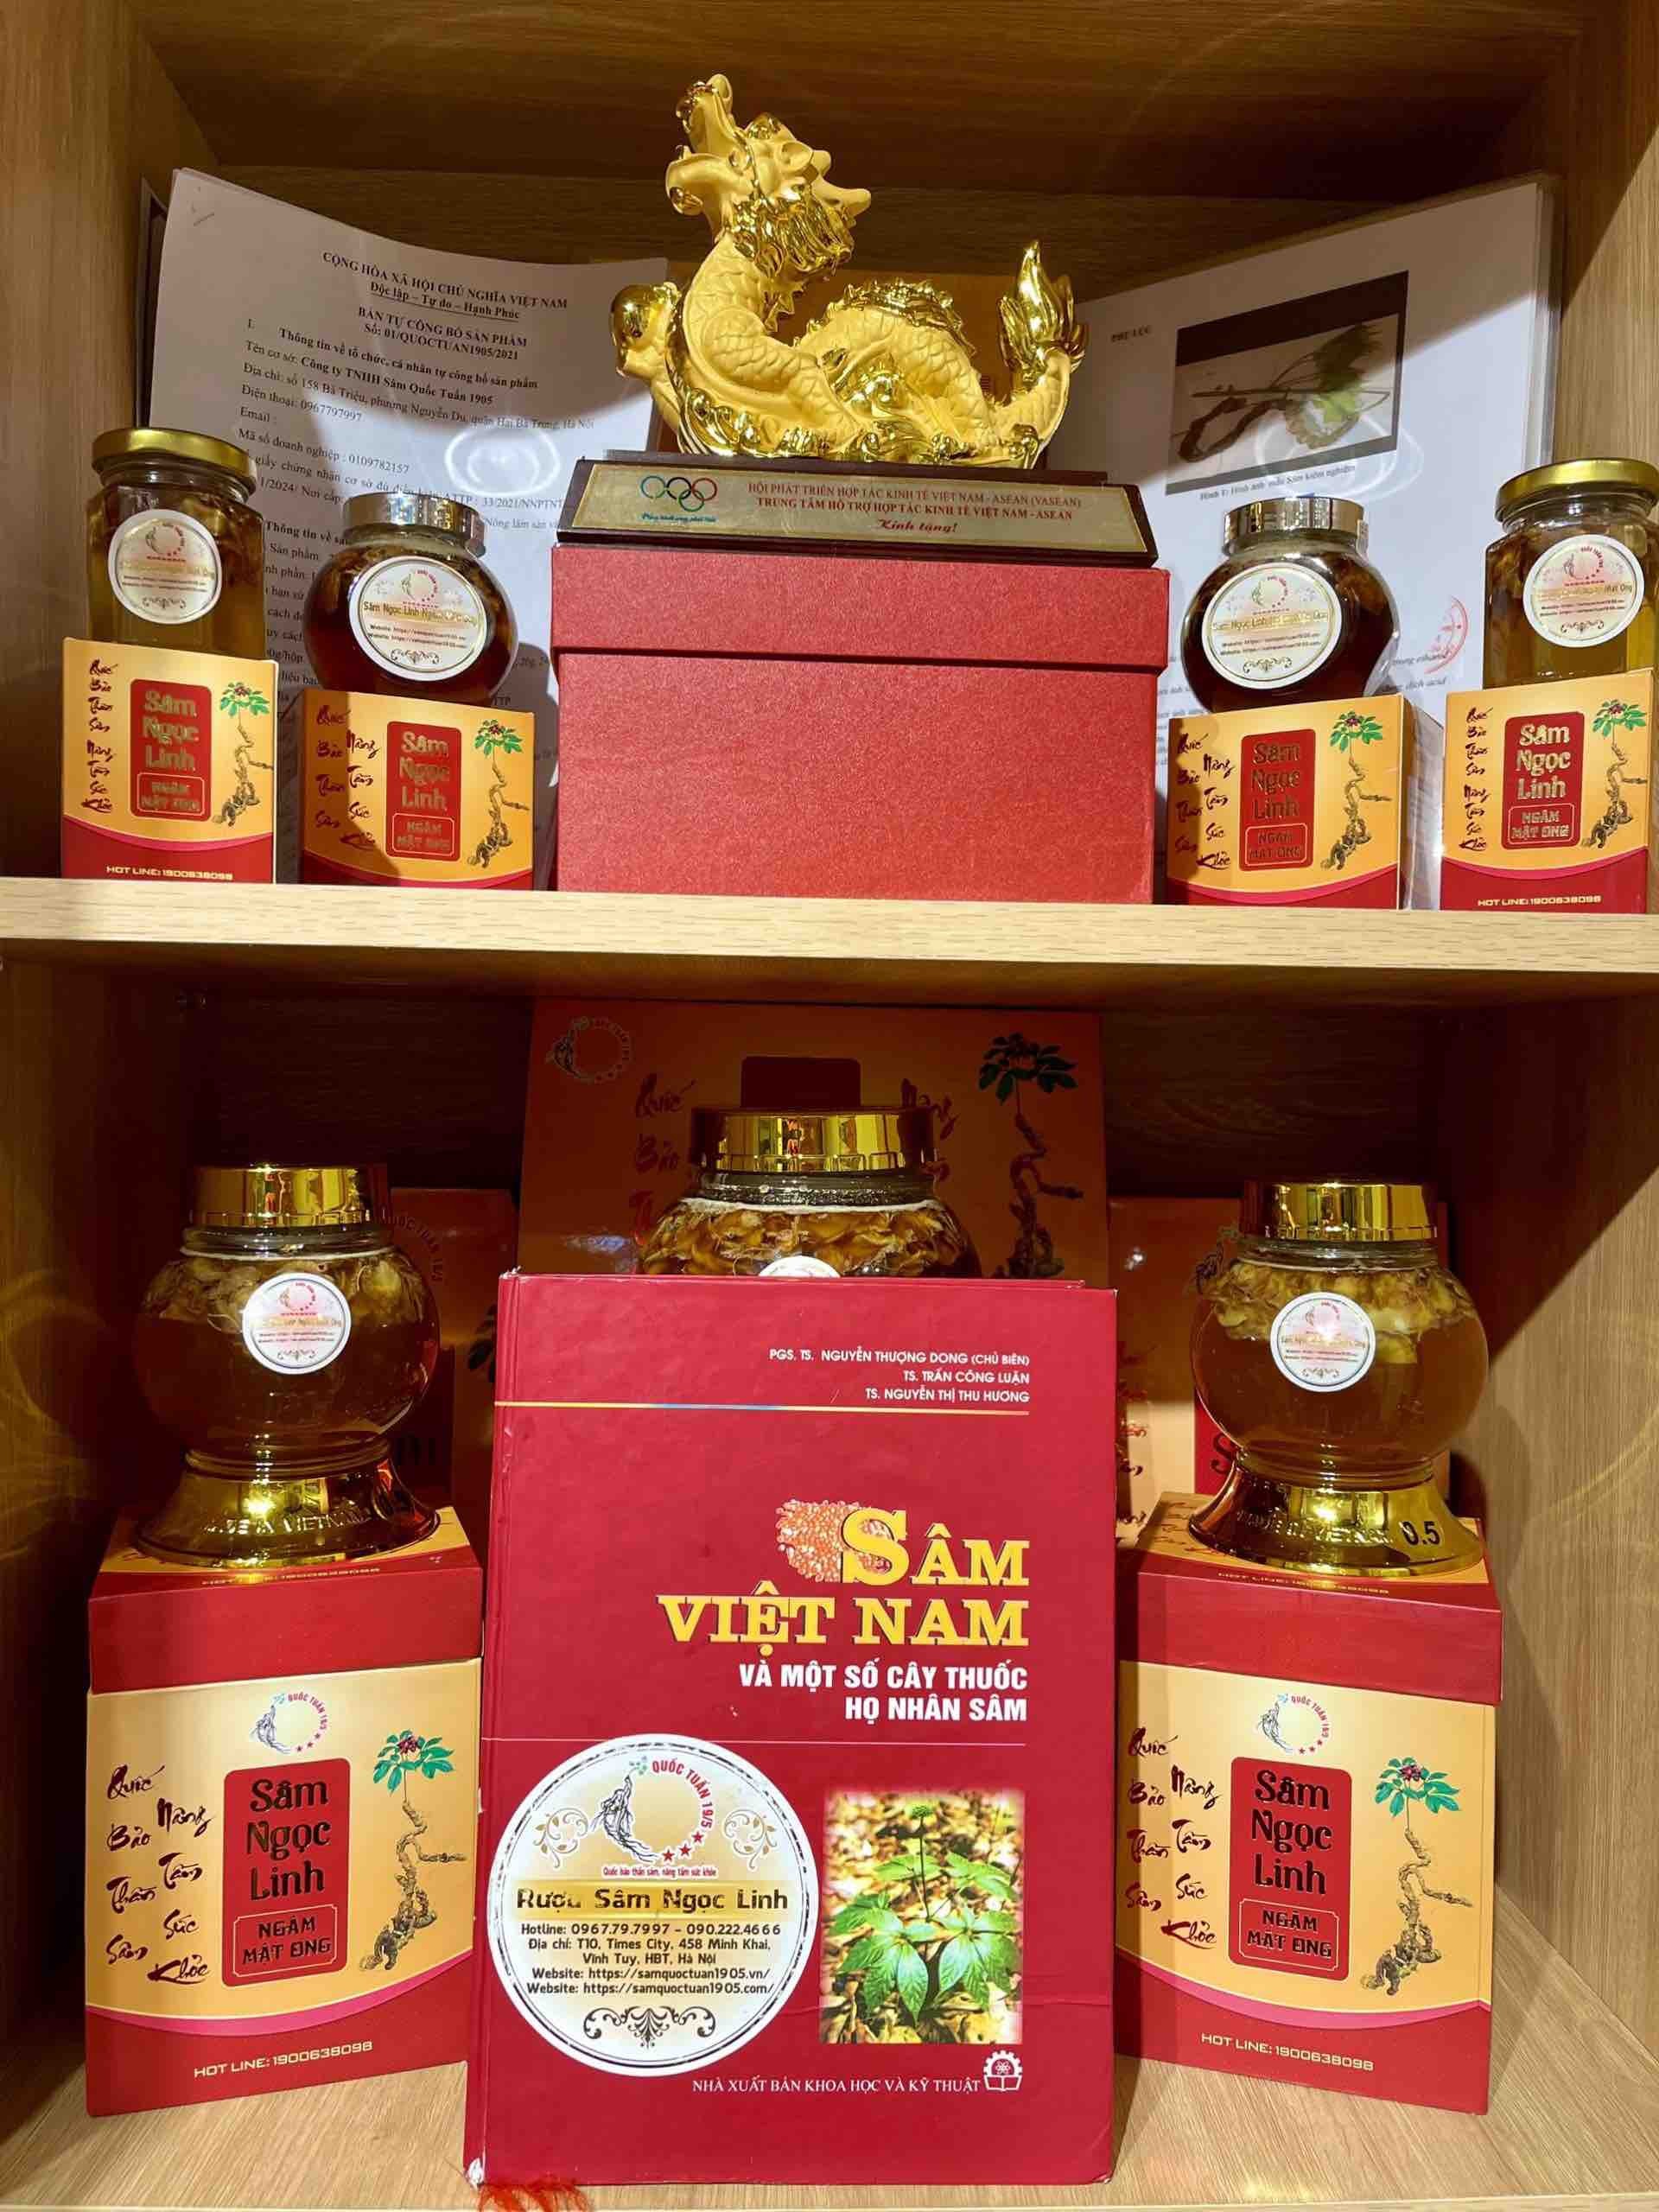 CEO Ha Quoc Tuan and the dream of bringing Viet Nam's Ngoc Linh Ginseng to the world